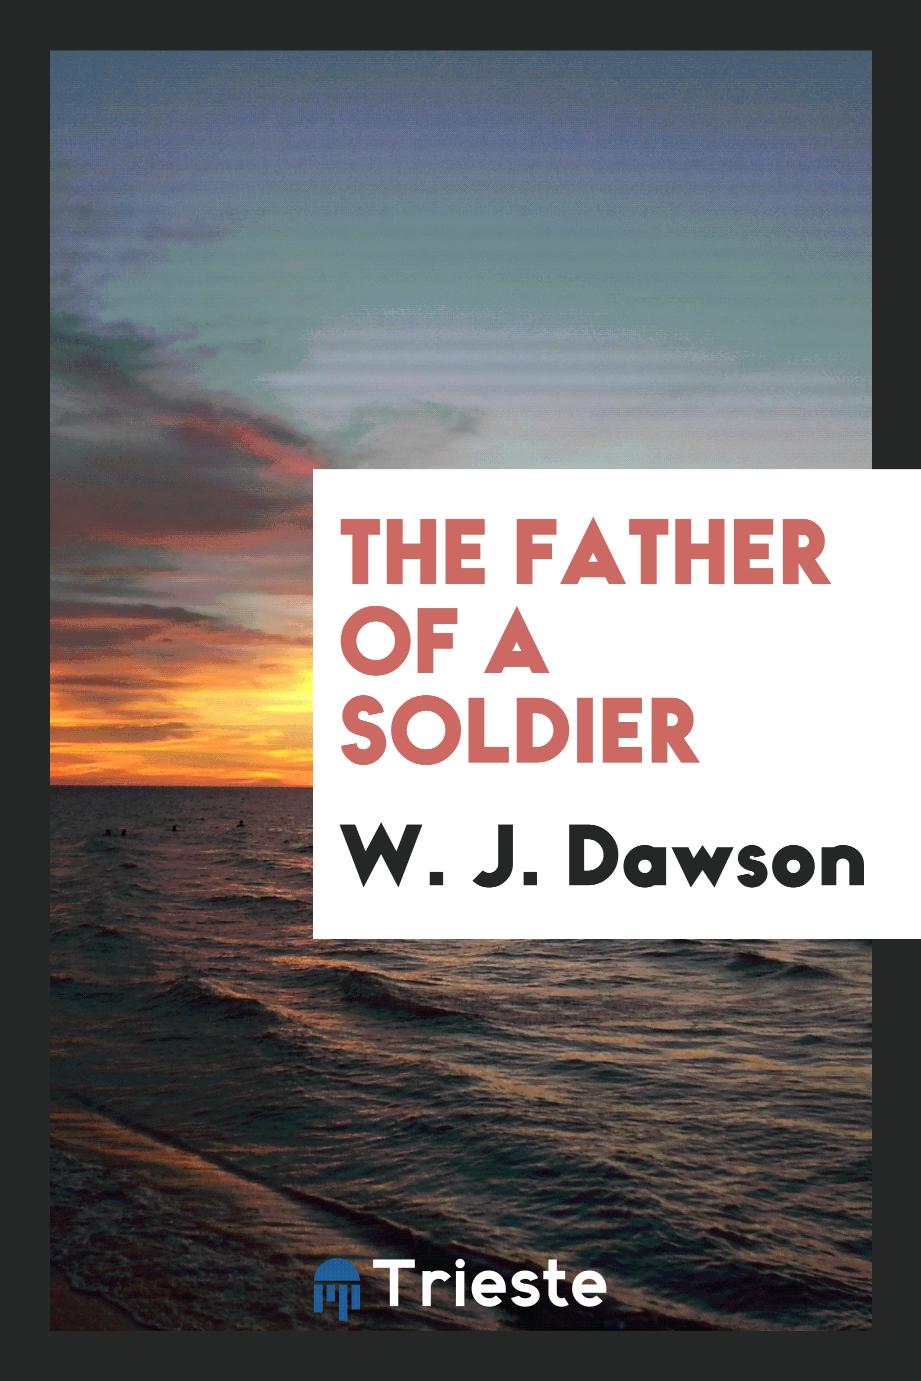 The father of a soldier